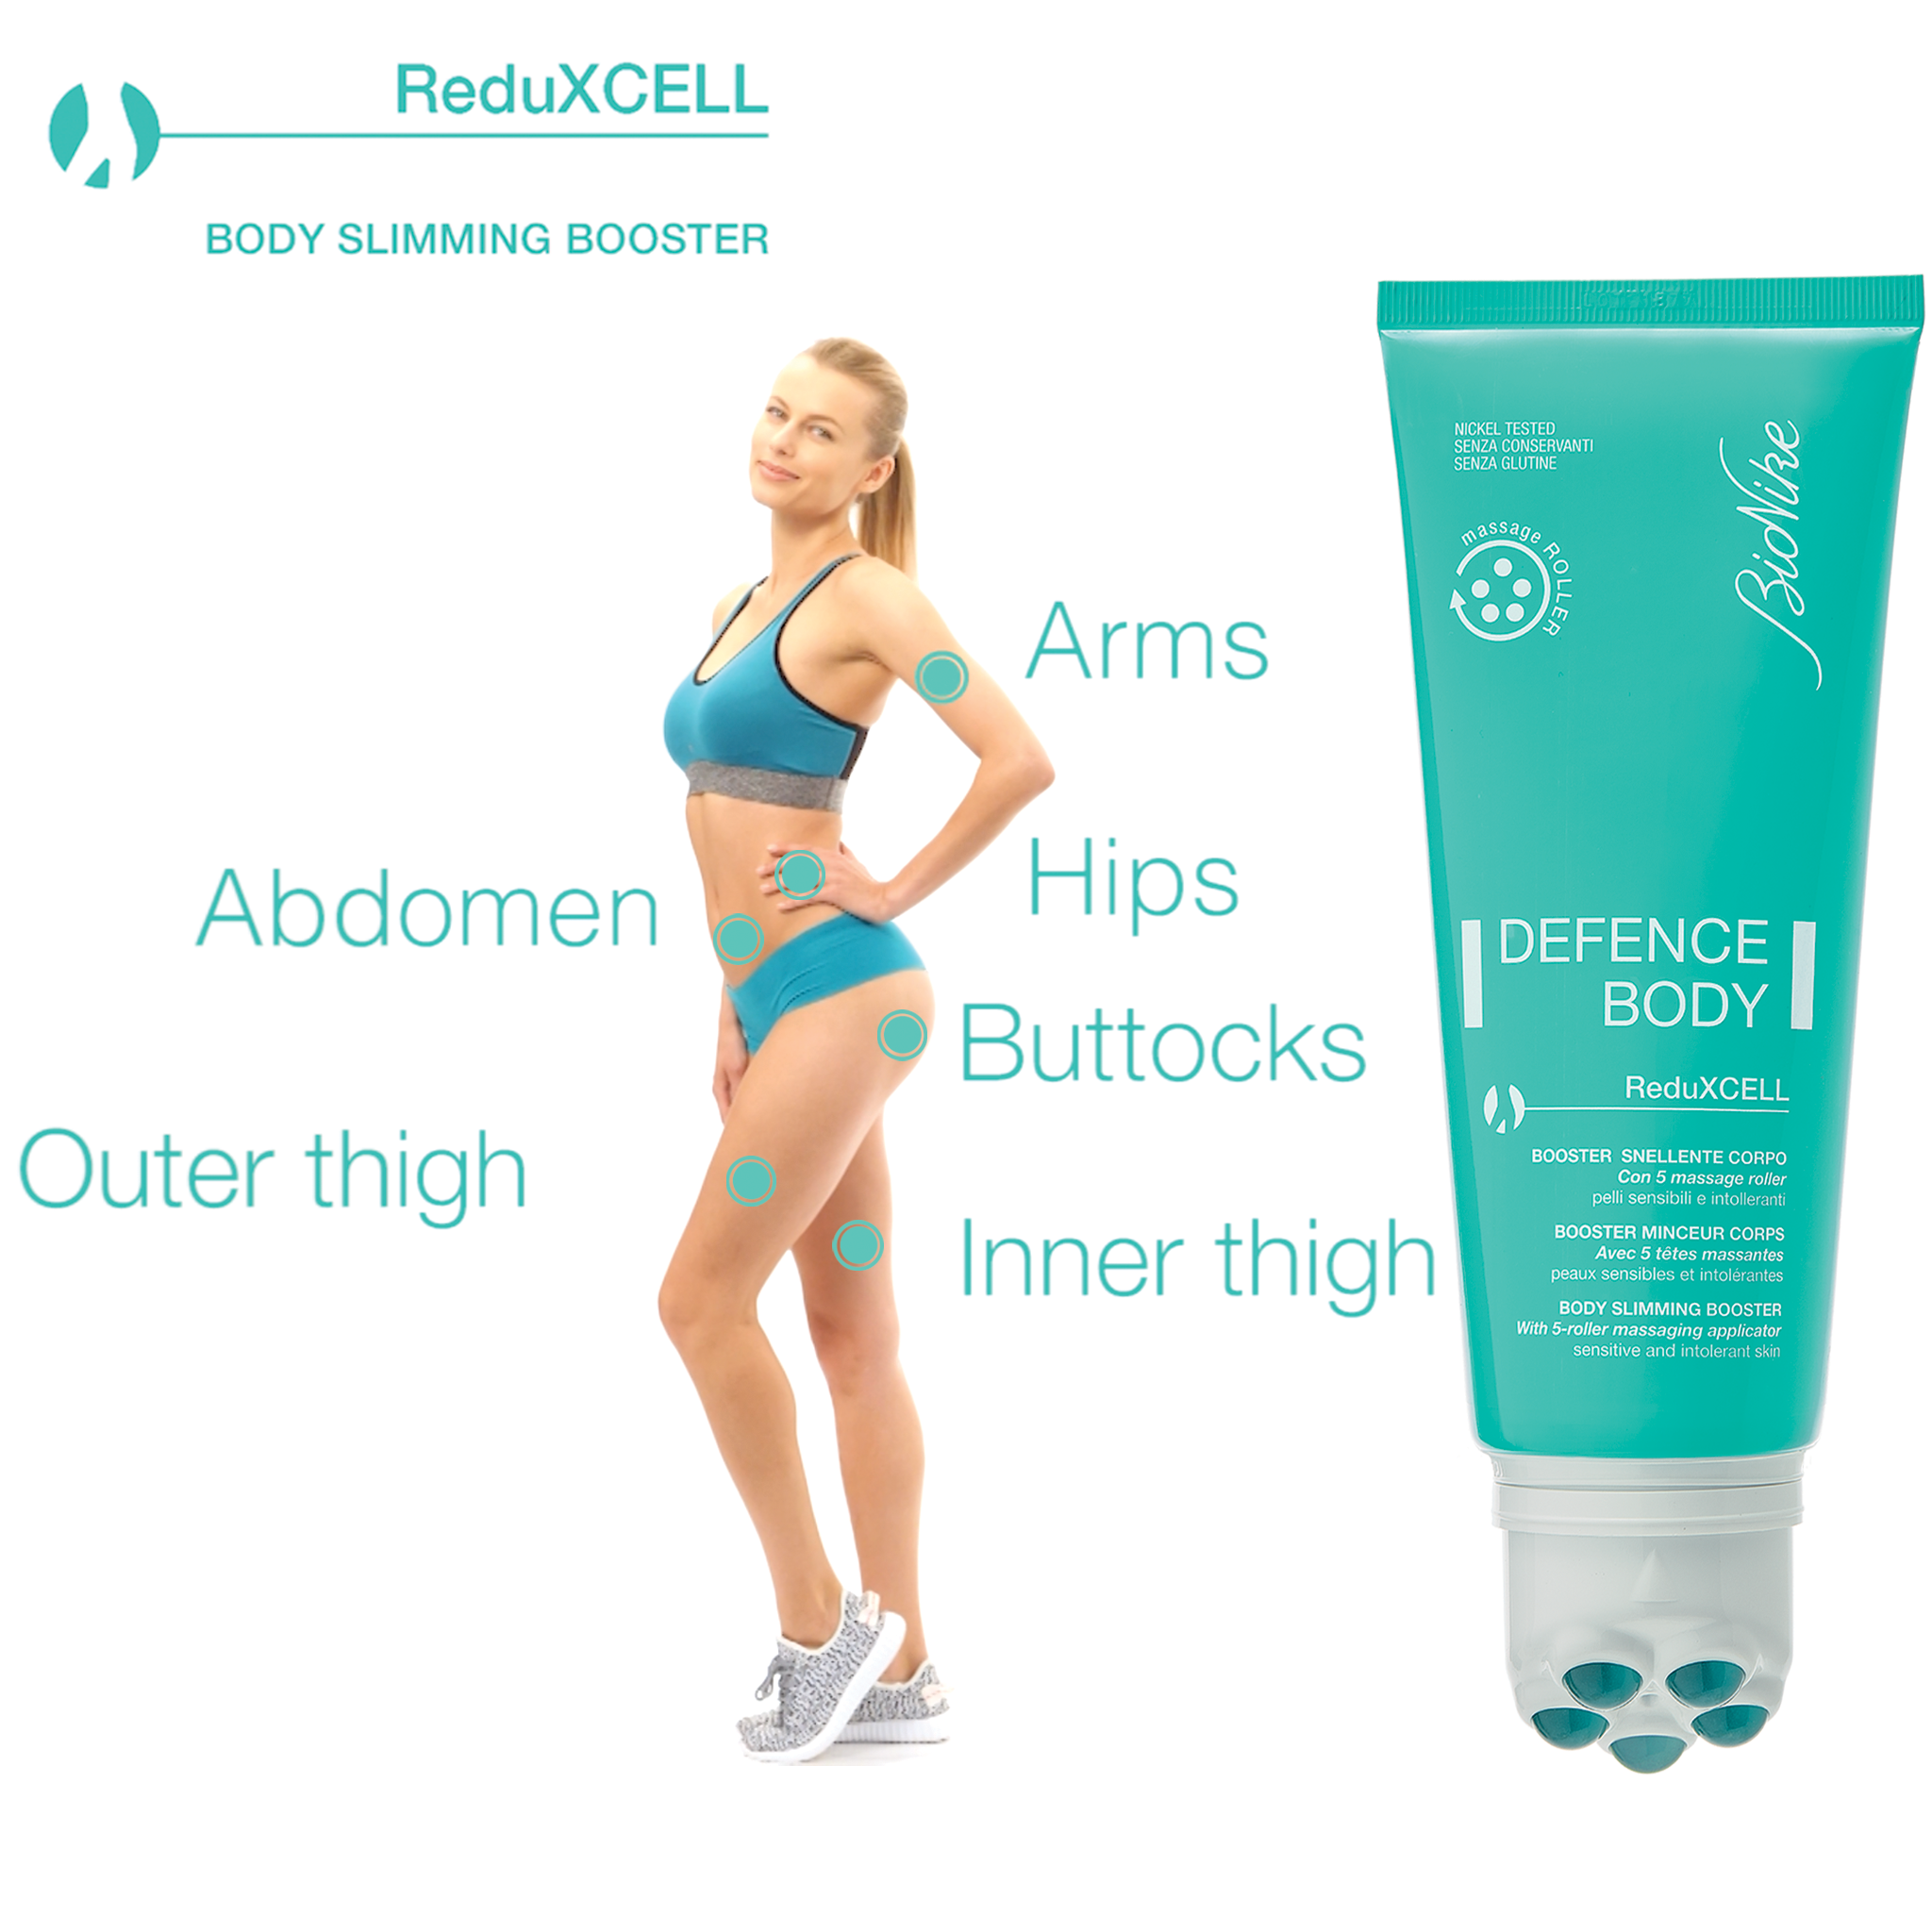 DEFENCE BODY ReduXCELLBODY SLIMMING BOOSTER With 5-roller massaging ap –  BioNike Lebanon